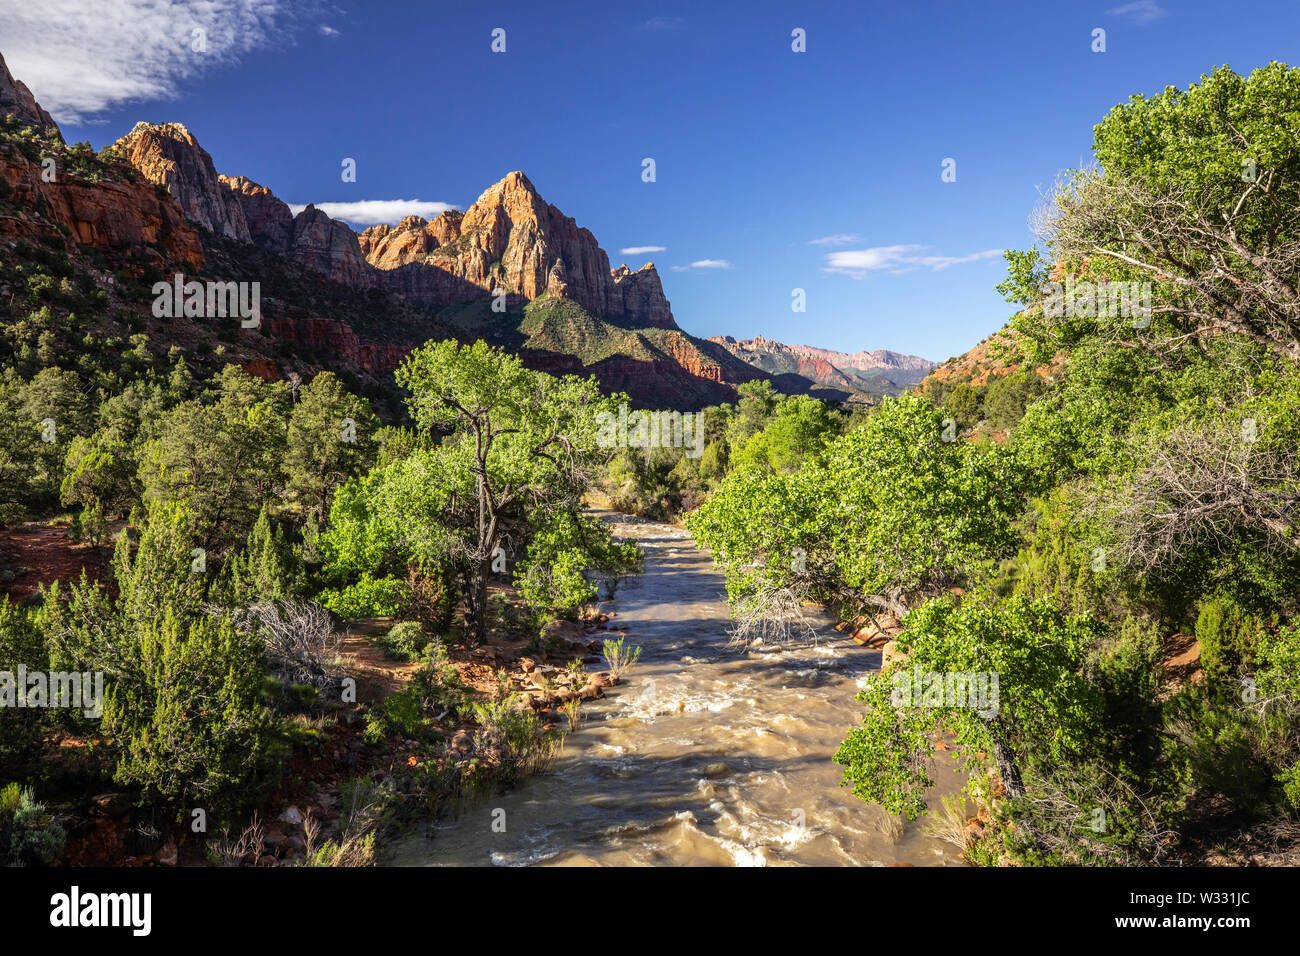 Zion National Park, Utah, United States of America Banque D'Images